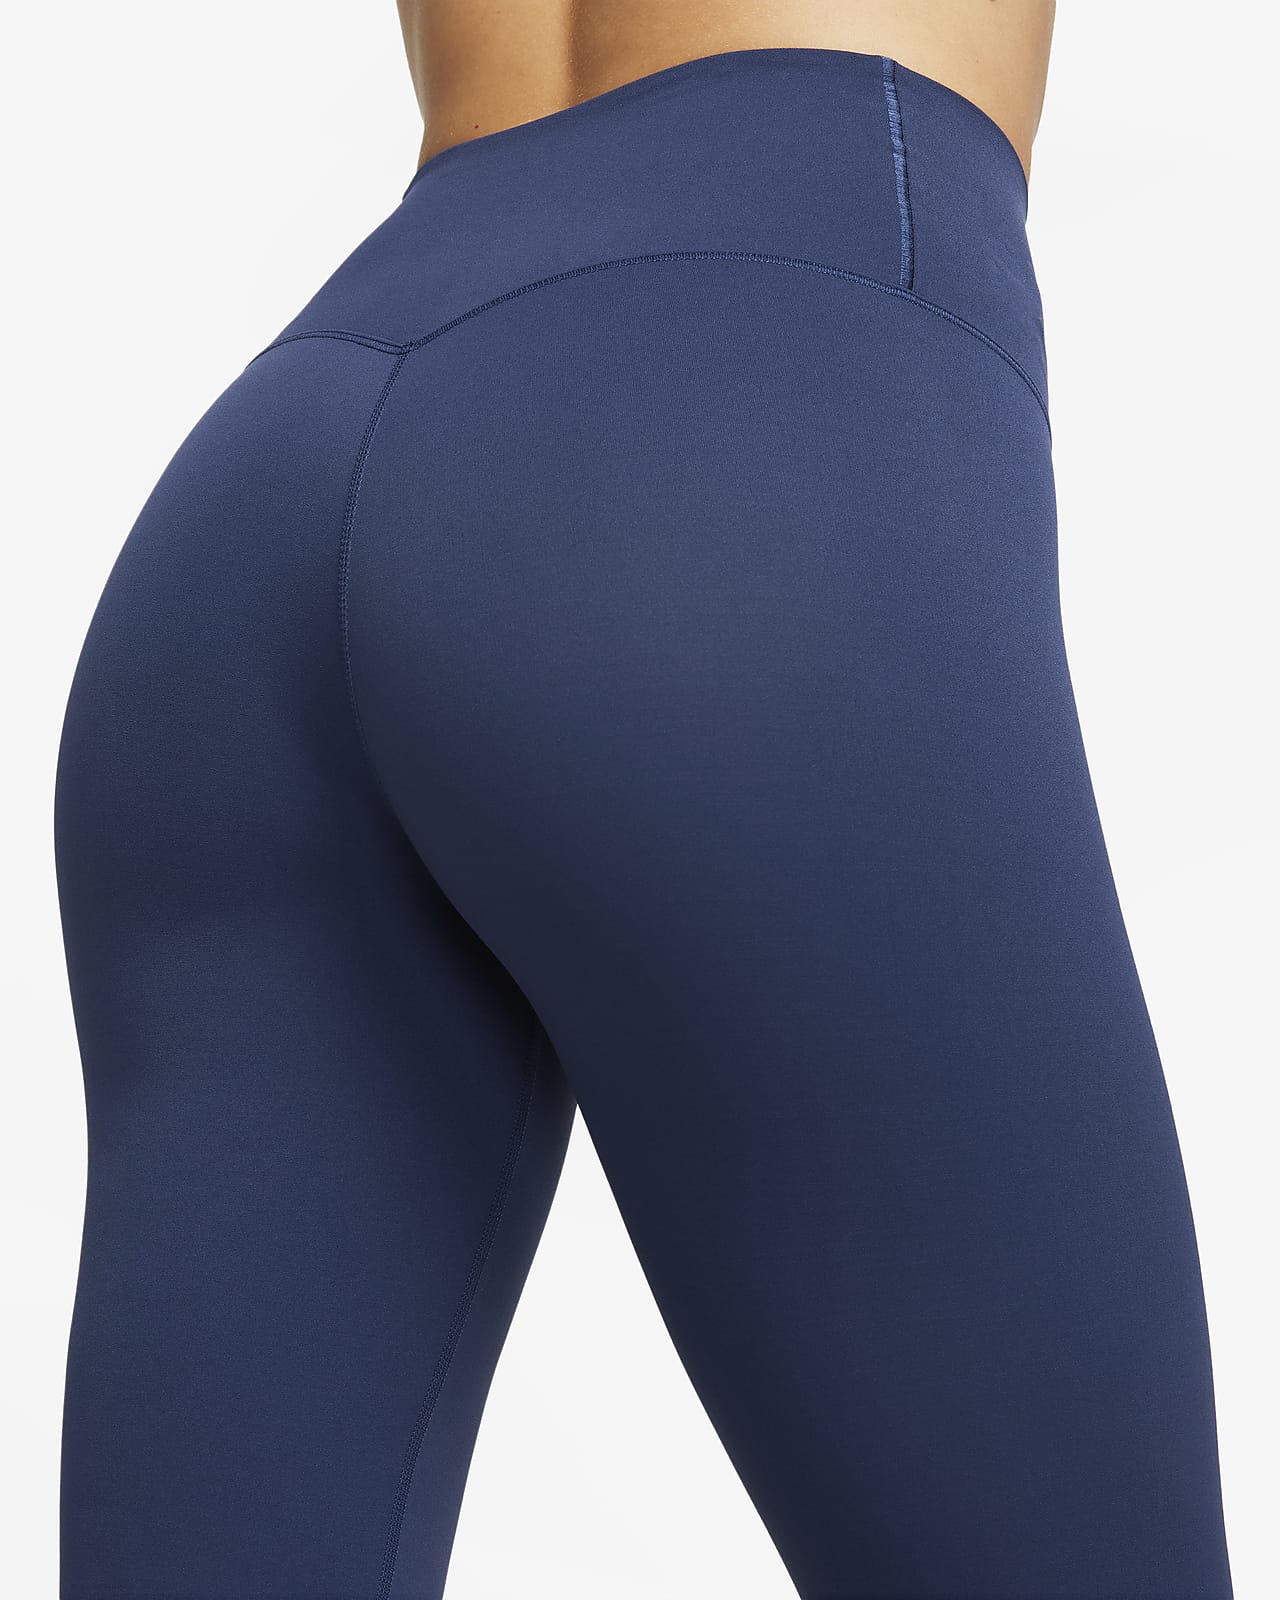 Nike Zenvy Women's Gentle-Support High-Waisted Cropped Leggings (Plus Size)